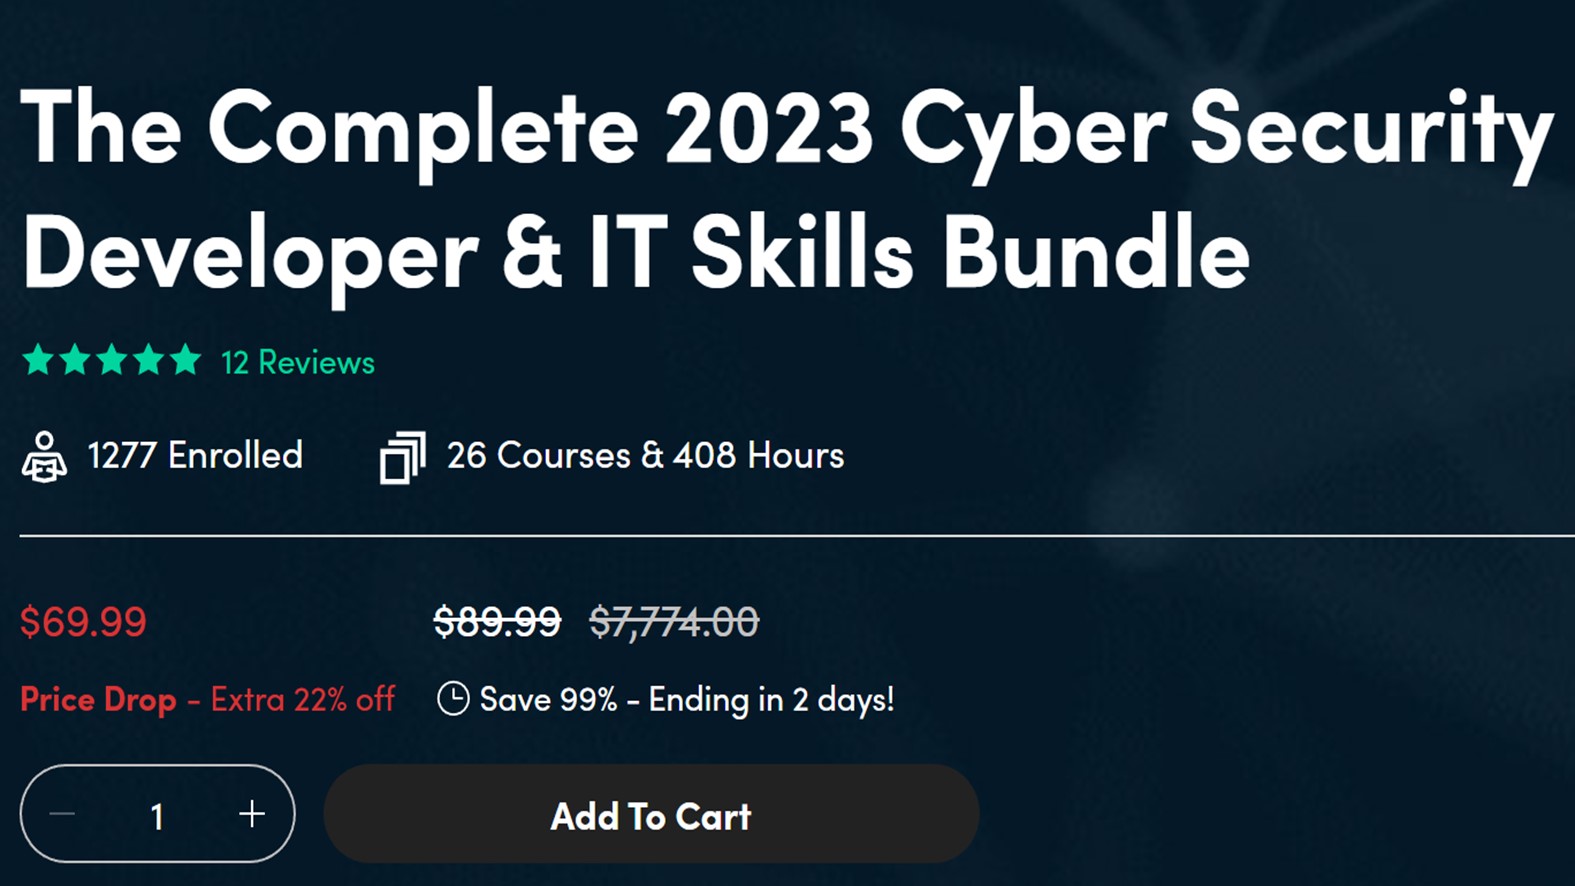 The Complete 2023 Cyber Security Developer and IT Skills Bundle